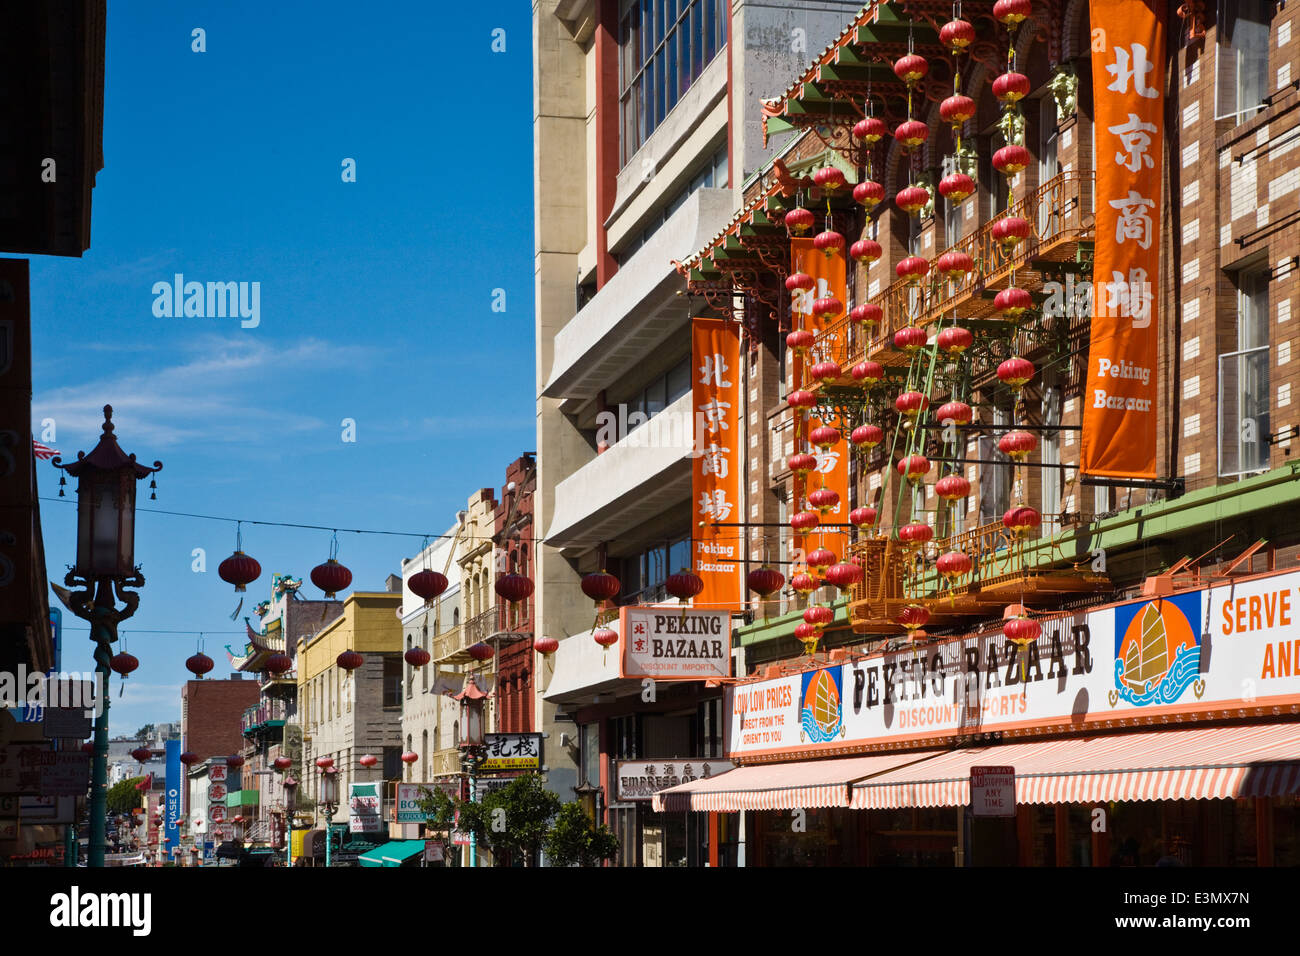 Shop signs in Chinese on a street in CHINA TOWN - SAN FRANCISCO, CALIFORNIA Stock Photo